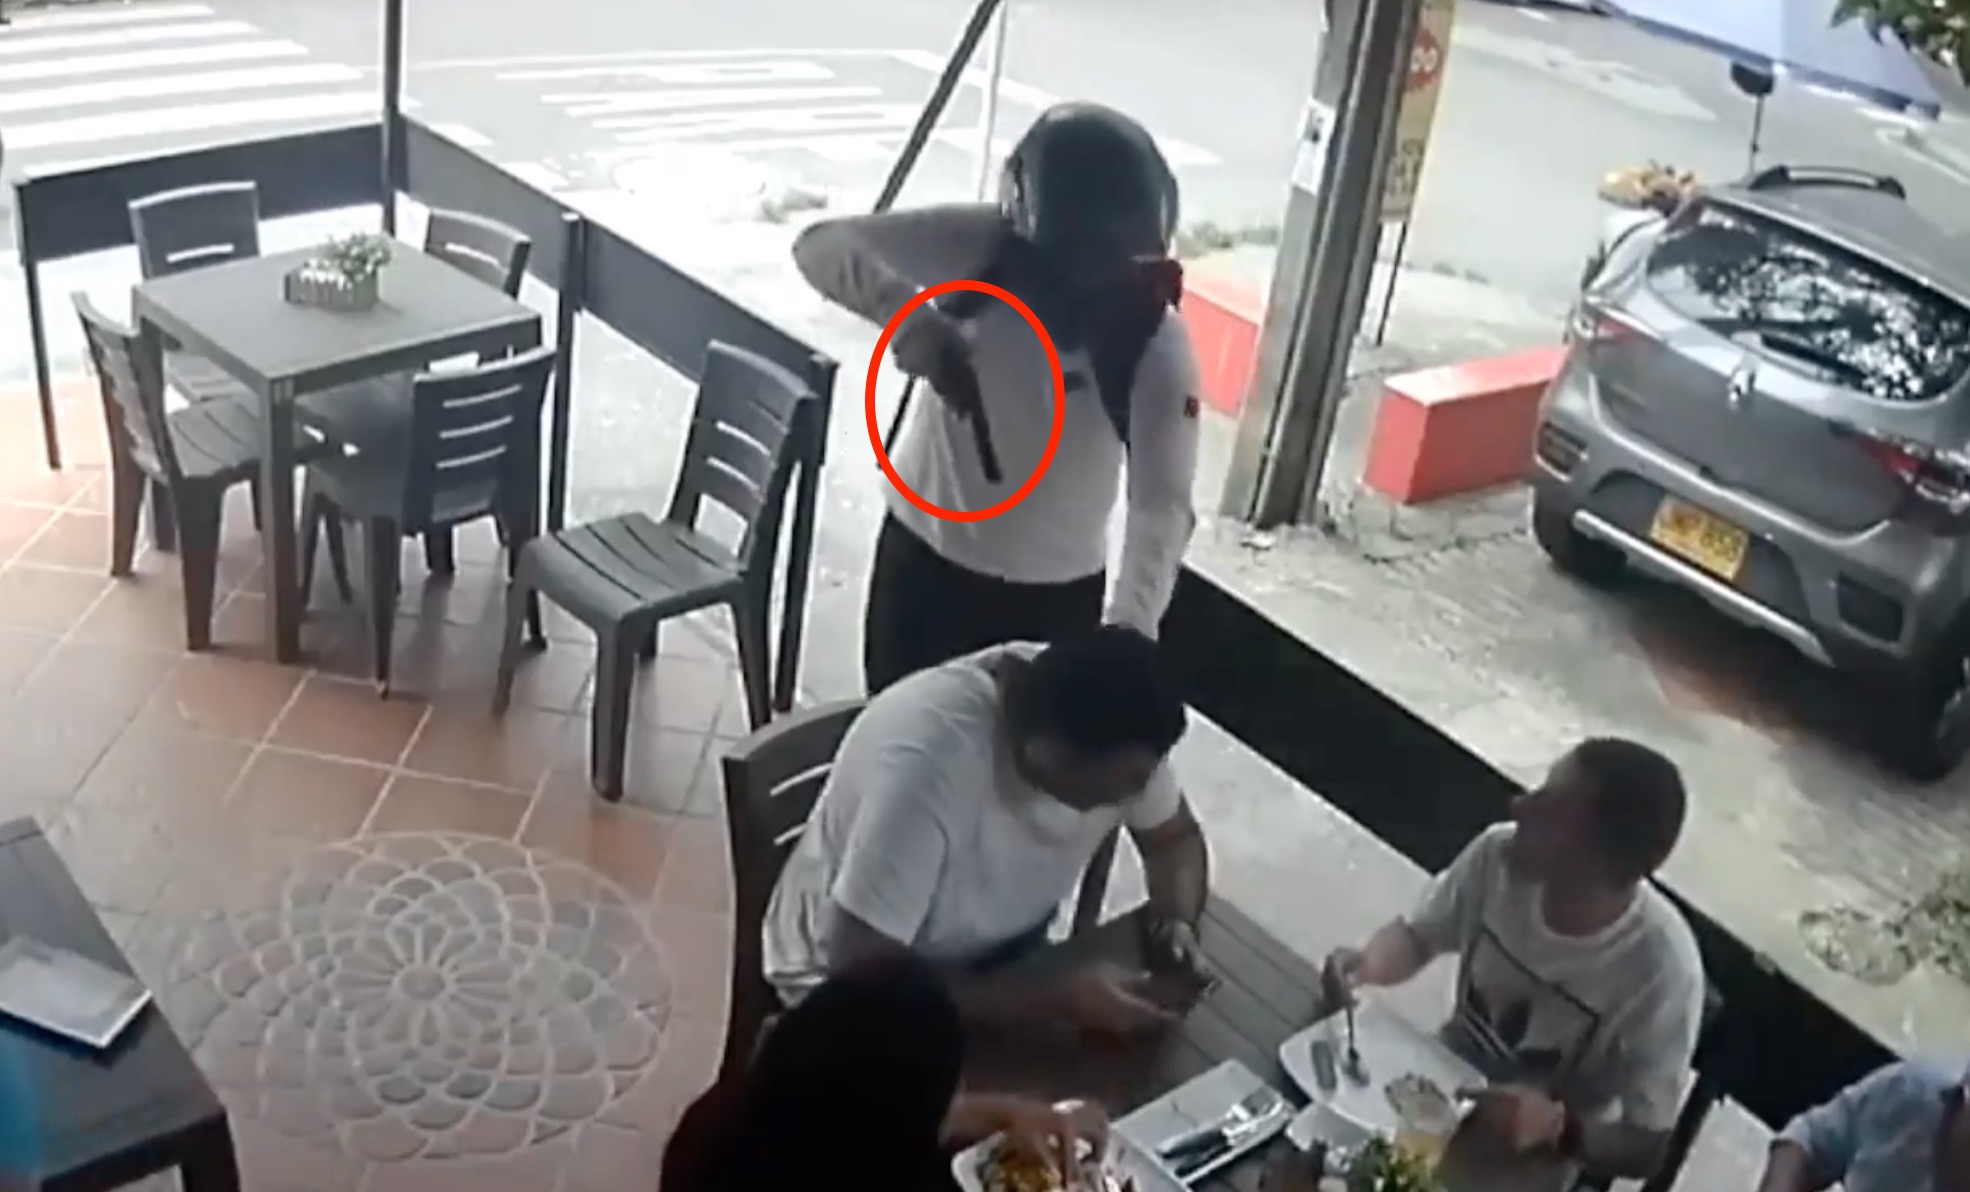 Bizarre Failed Armed Robbery at Restaurant Caught on Camera - Watch Video